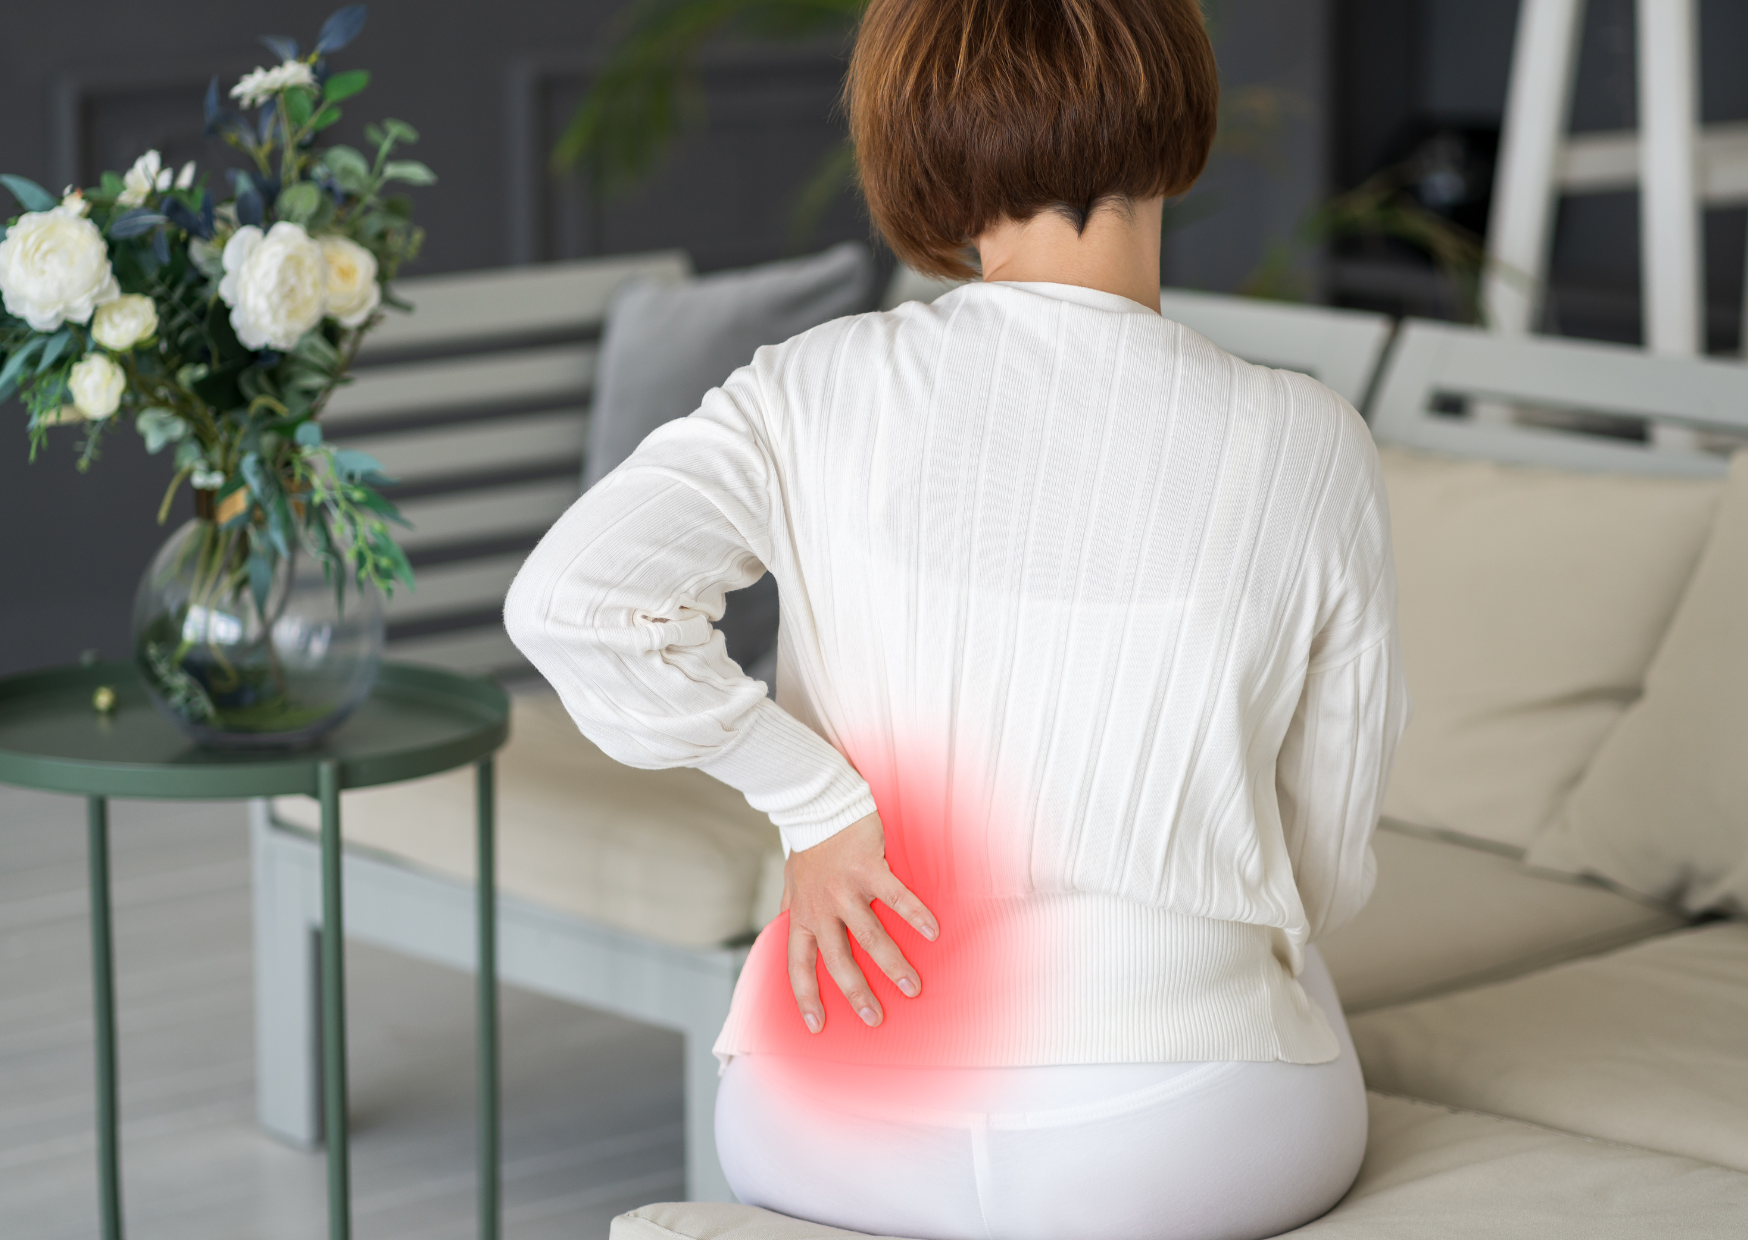 Can red light therapy help with osteoporosis? Woman with osteoporosis sitting in pain.